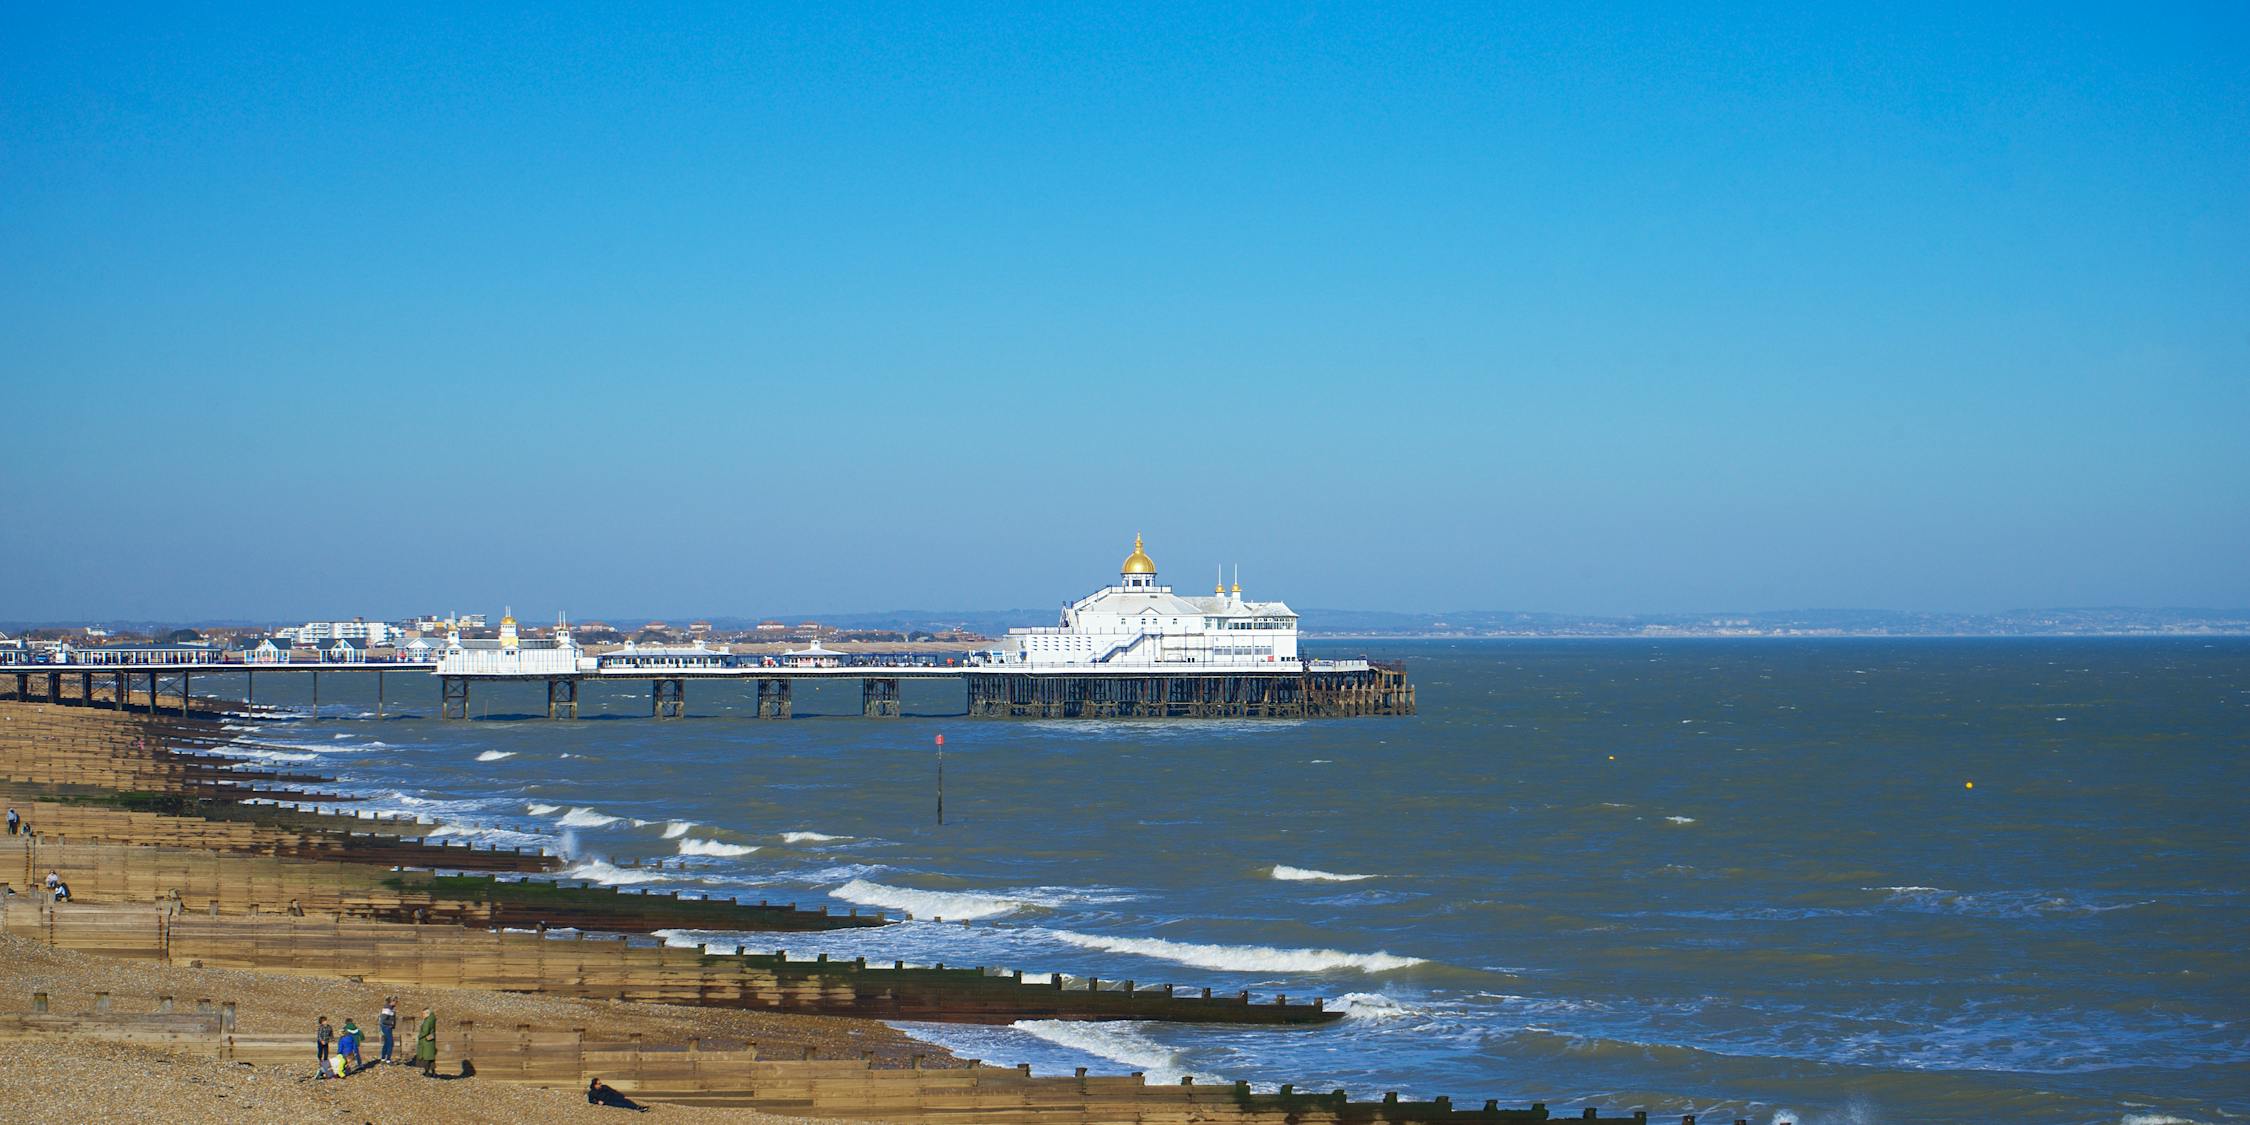 Photograph of the beach and sea at Eastbourne